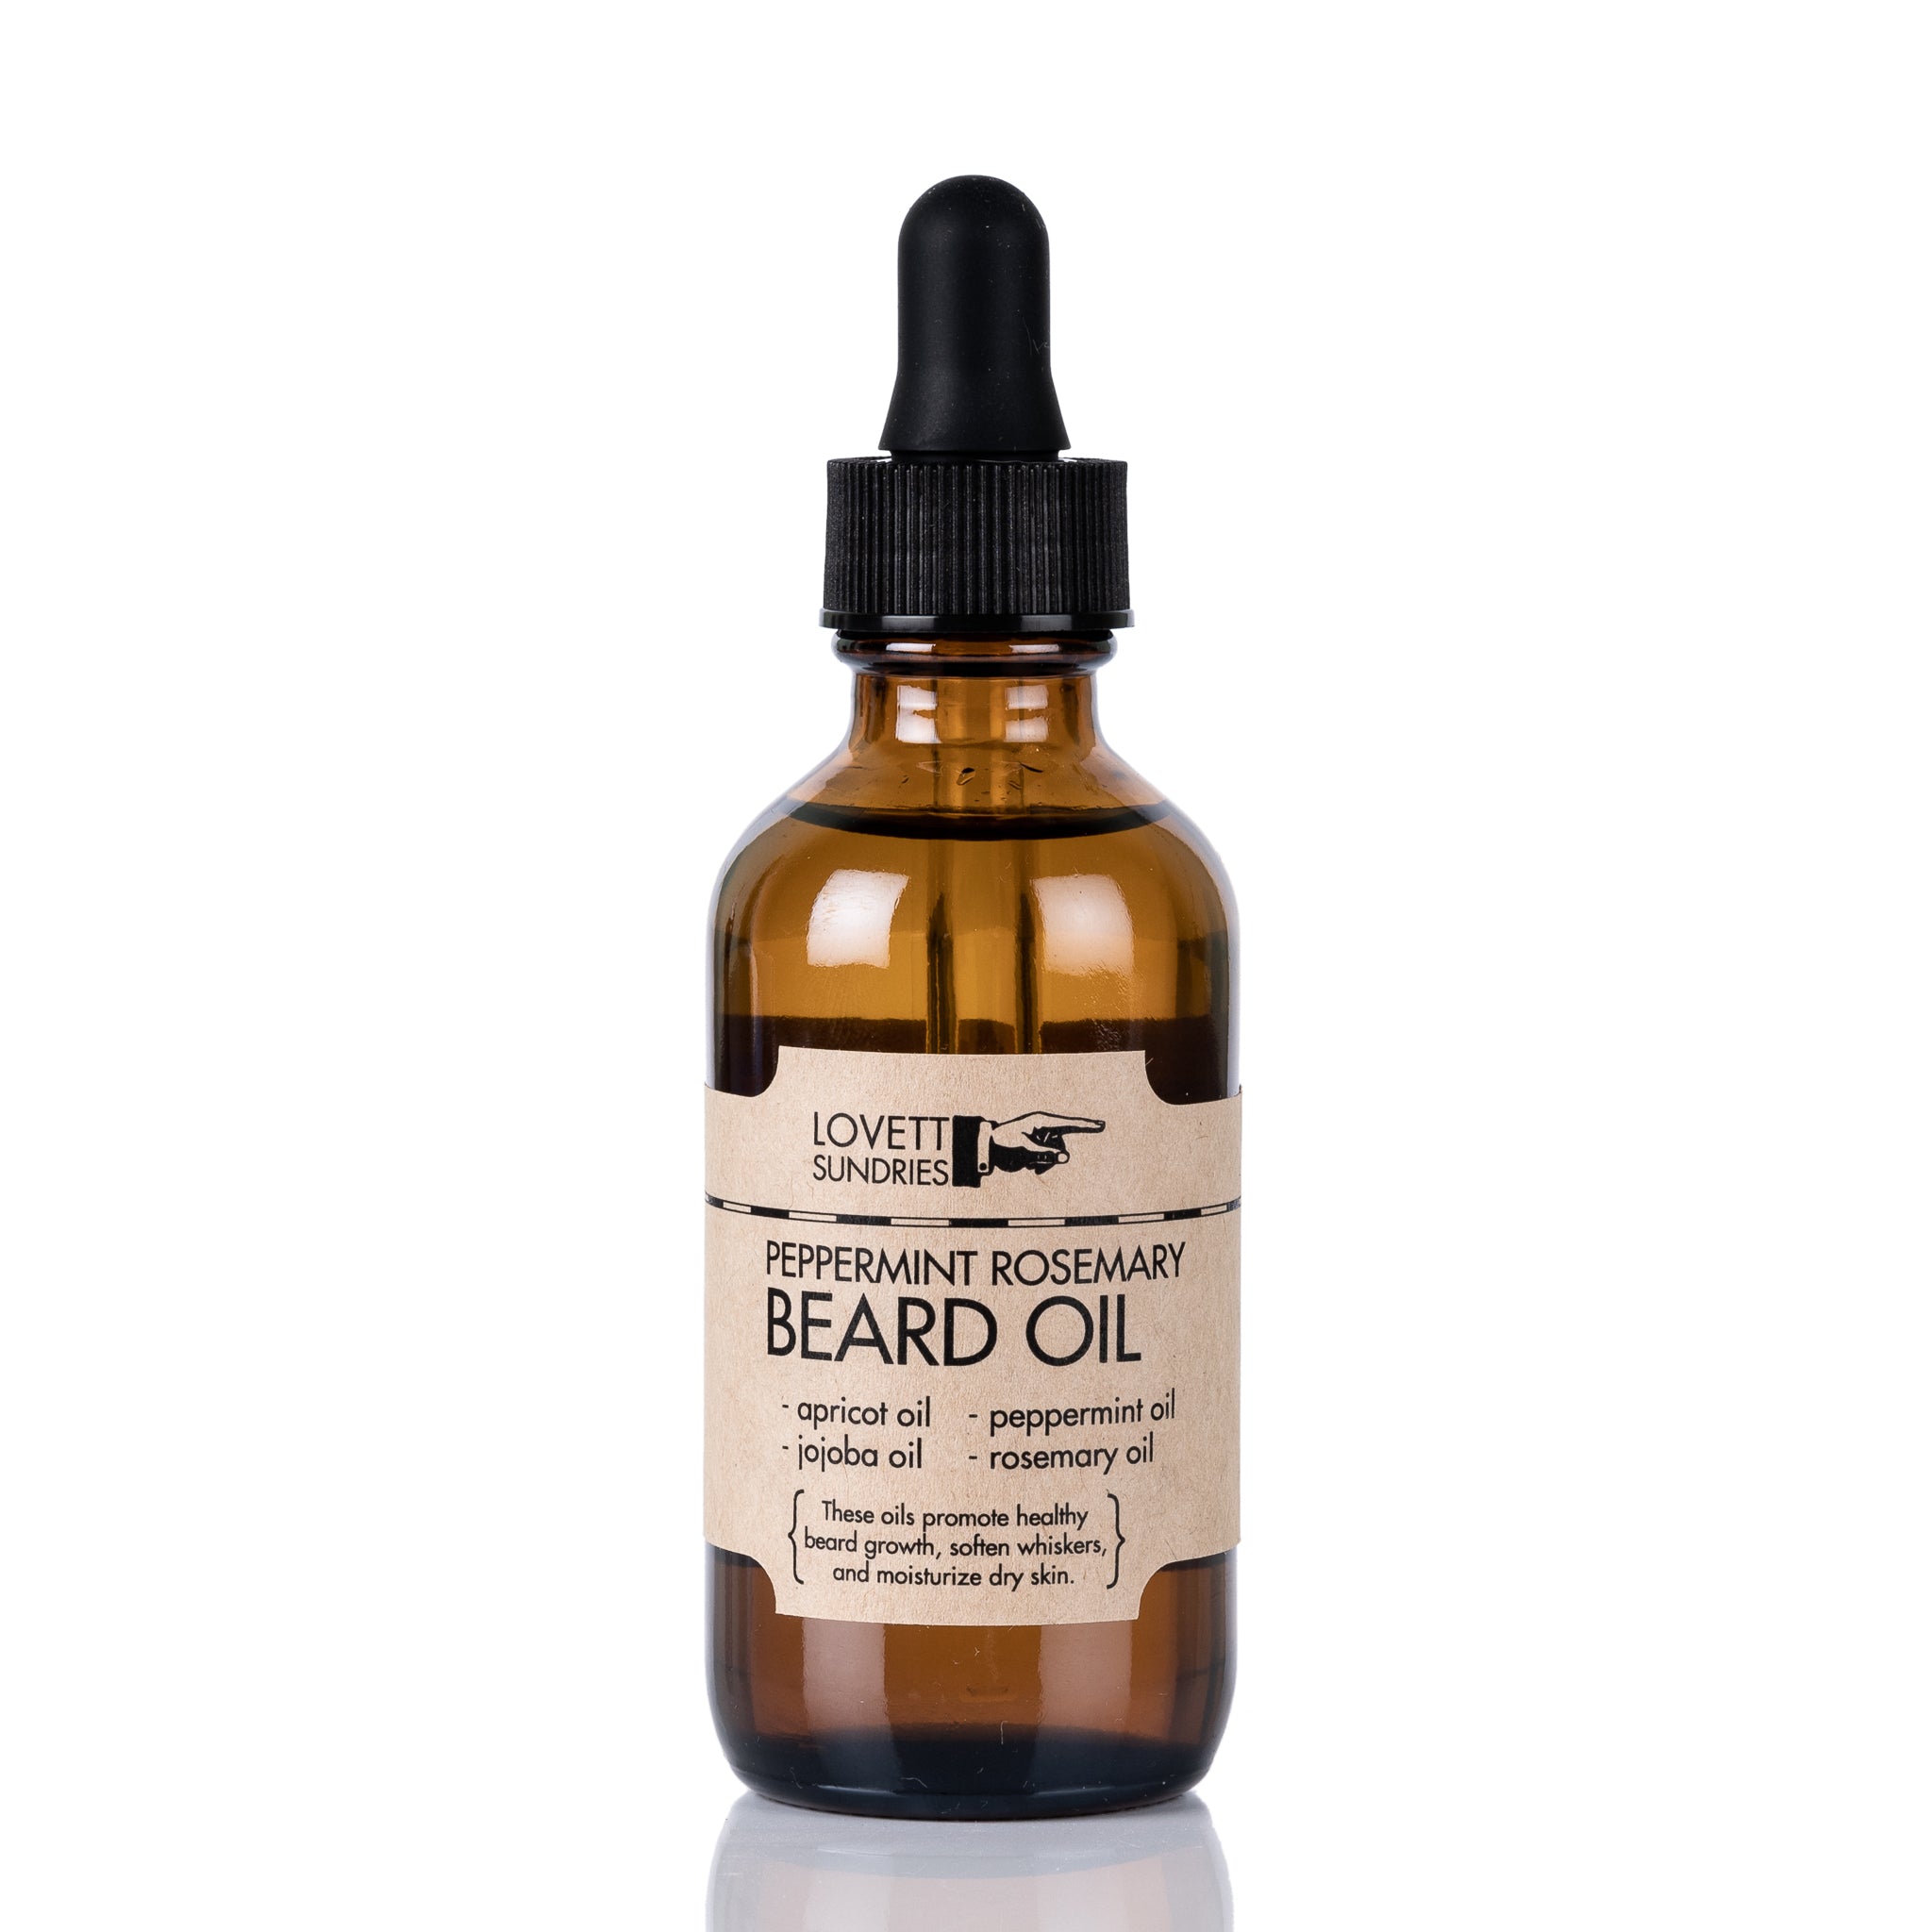 A bottle of peppermint rosemary scented natural beard oil.